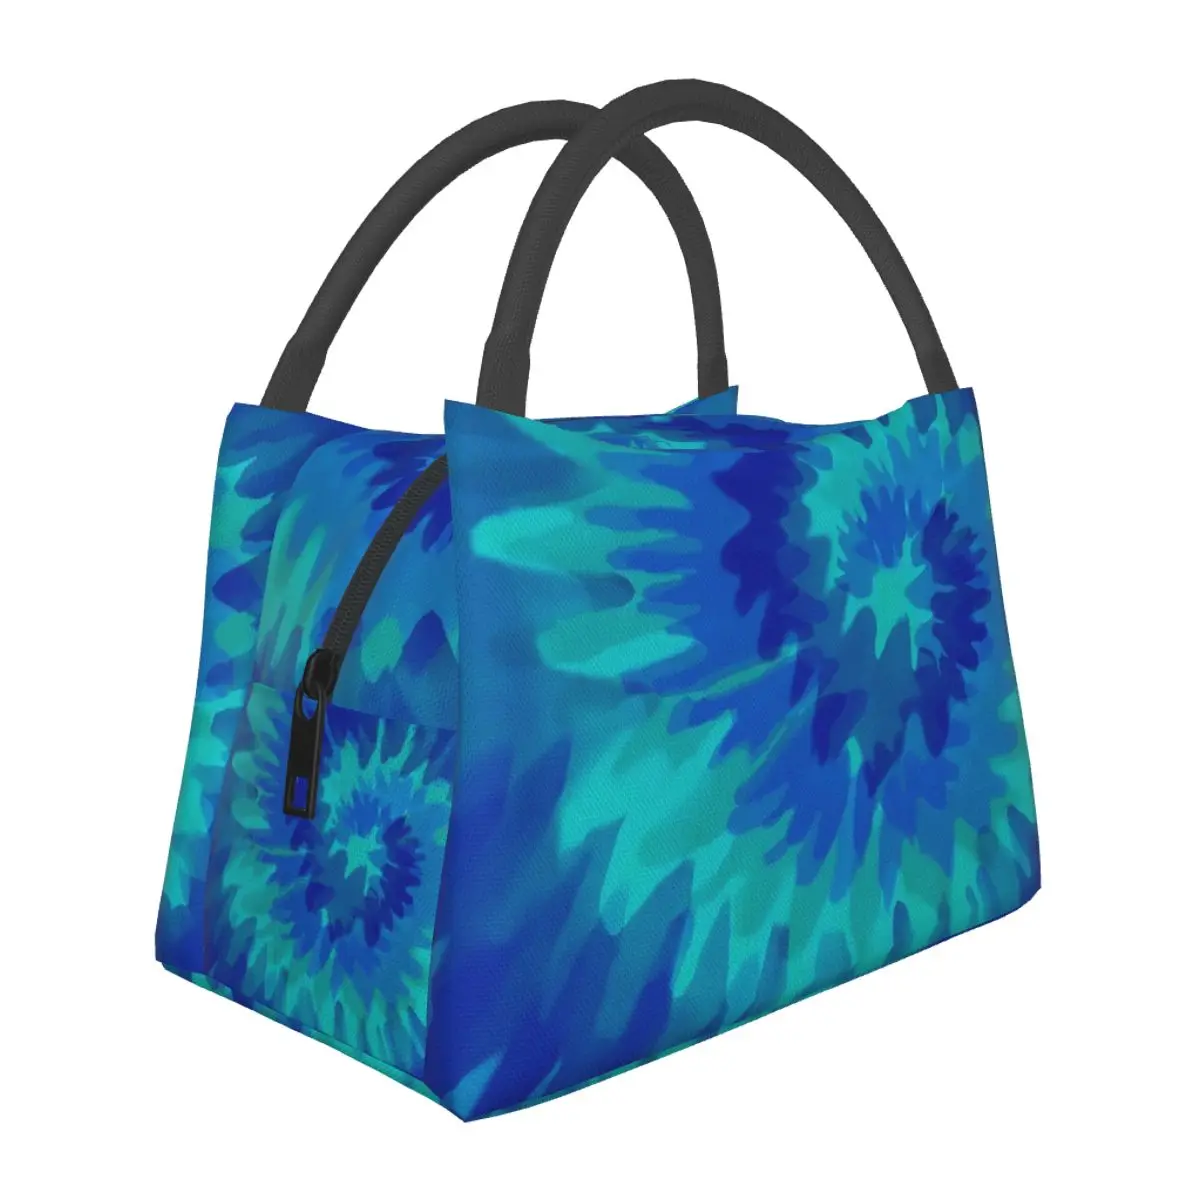 

Blue Vibrant Tie Dye Lunch Bag Retro Swirl Print Kawaii Lunch Box For Women Picnic Convenient Cooler Bag Graphic Tote Food Bags